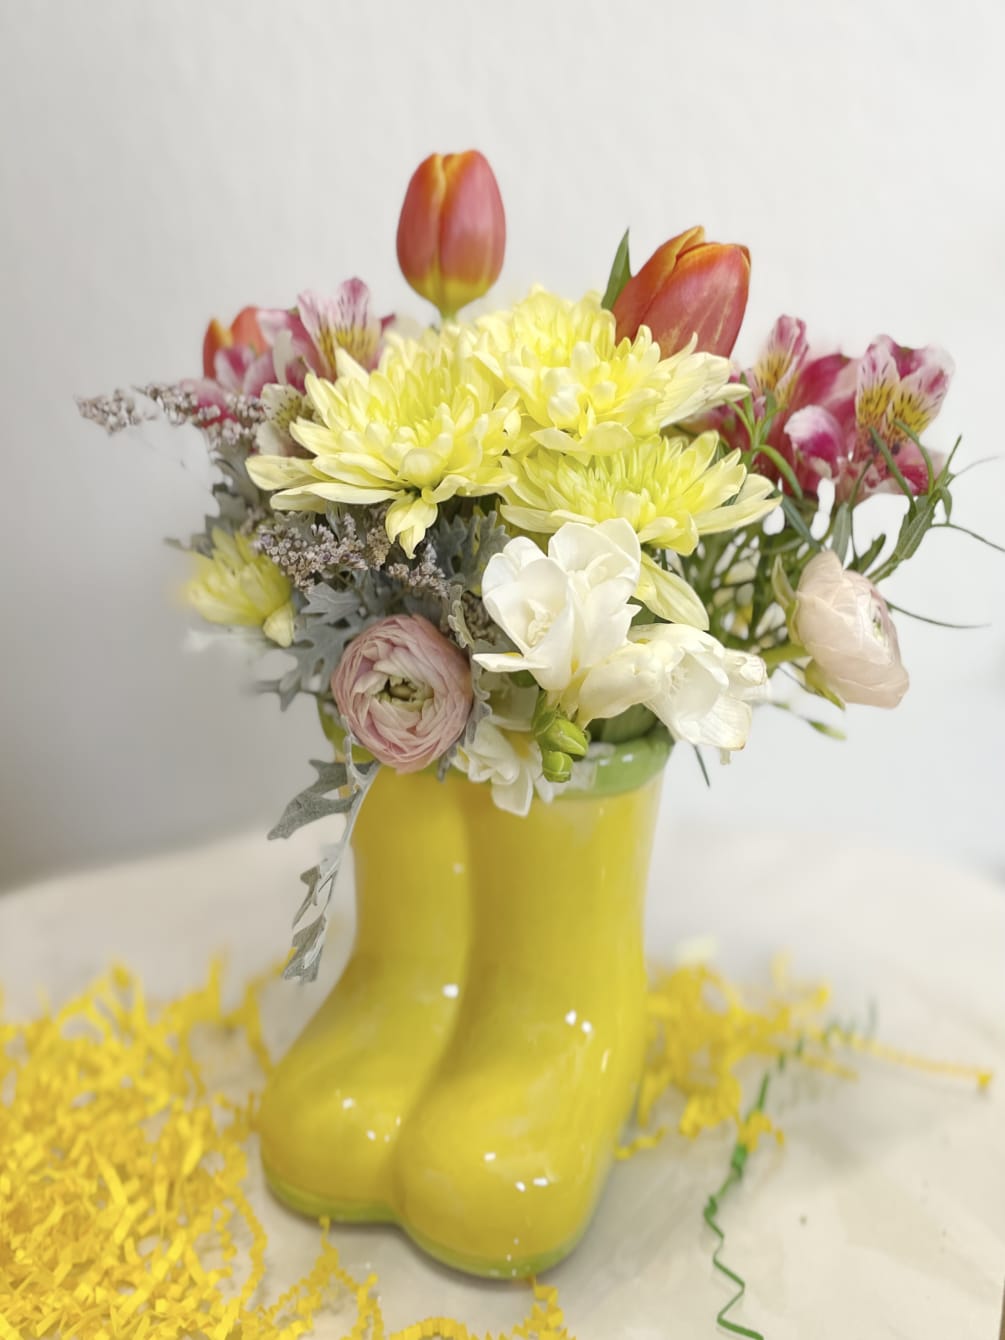 Brighten someone&#039;s day with these adorable rainboots, fashioned in a keepsake ceramic